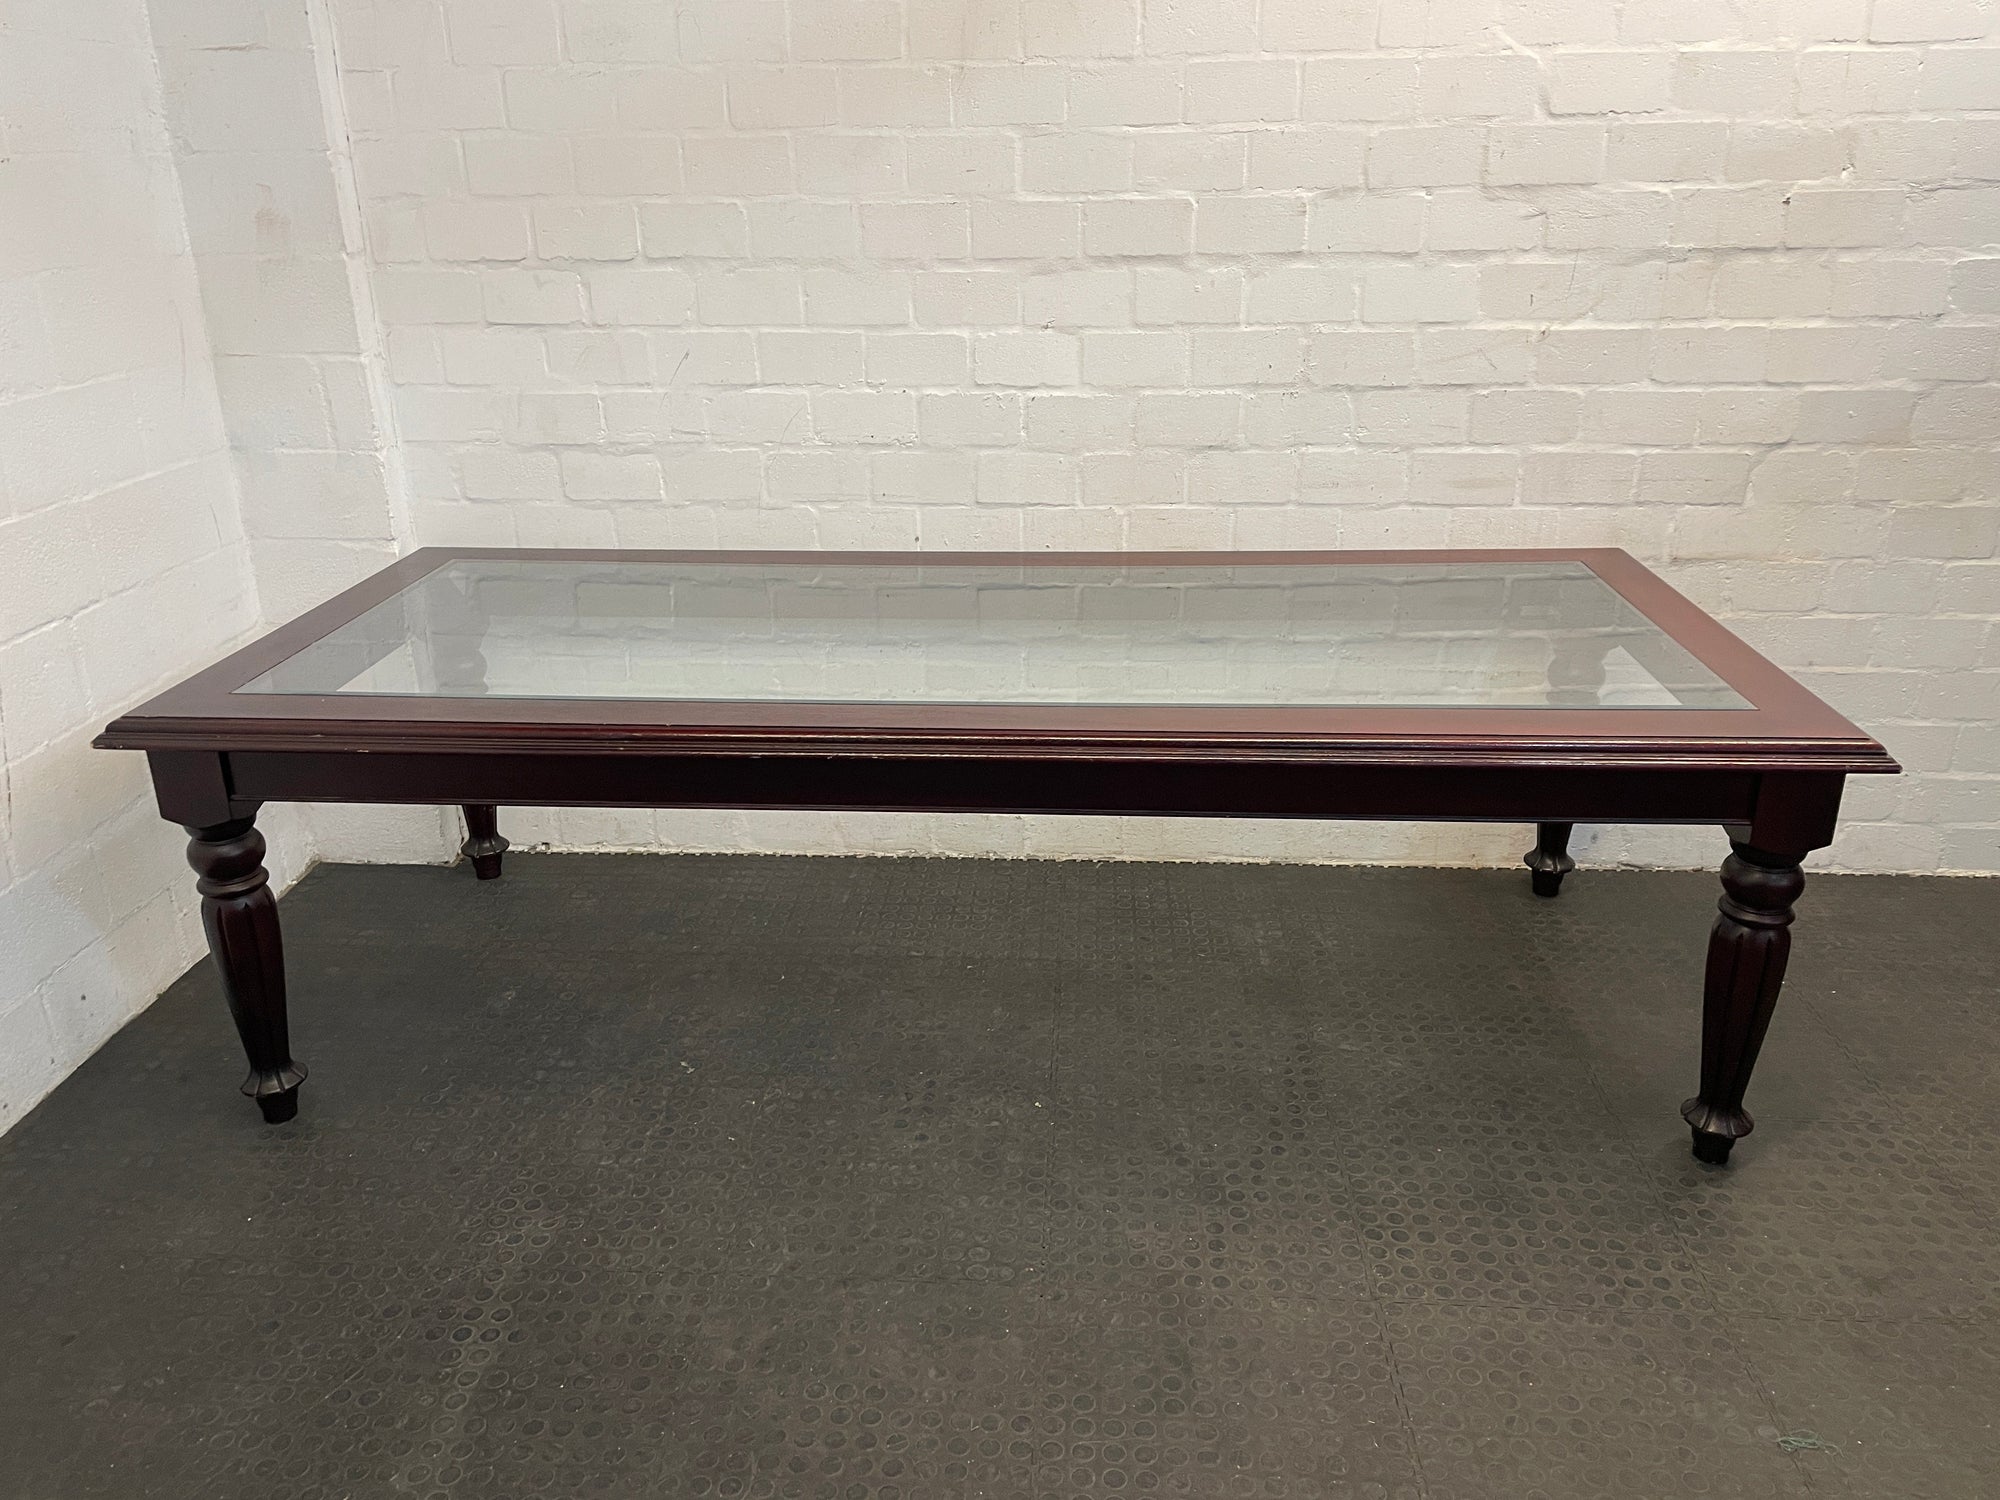 8 Seater Wooden Glass Top Dining Table - REDUCED